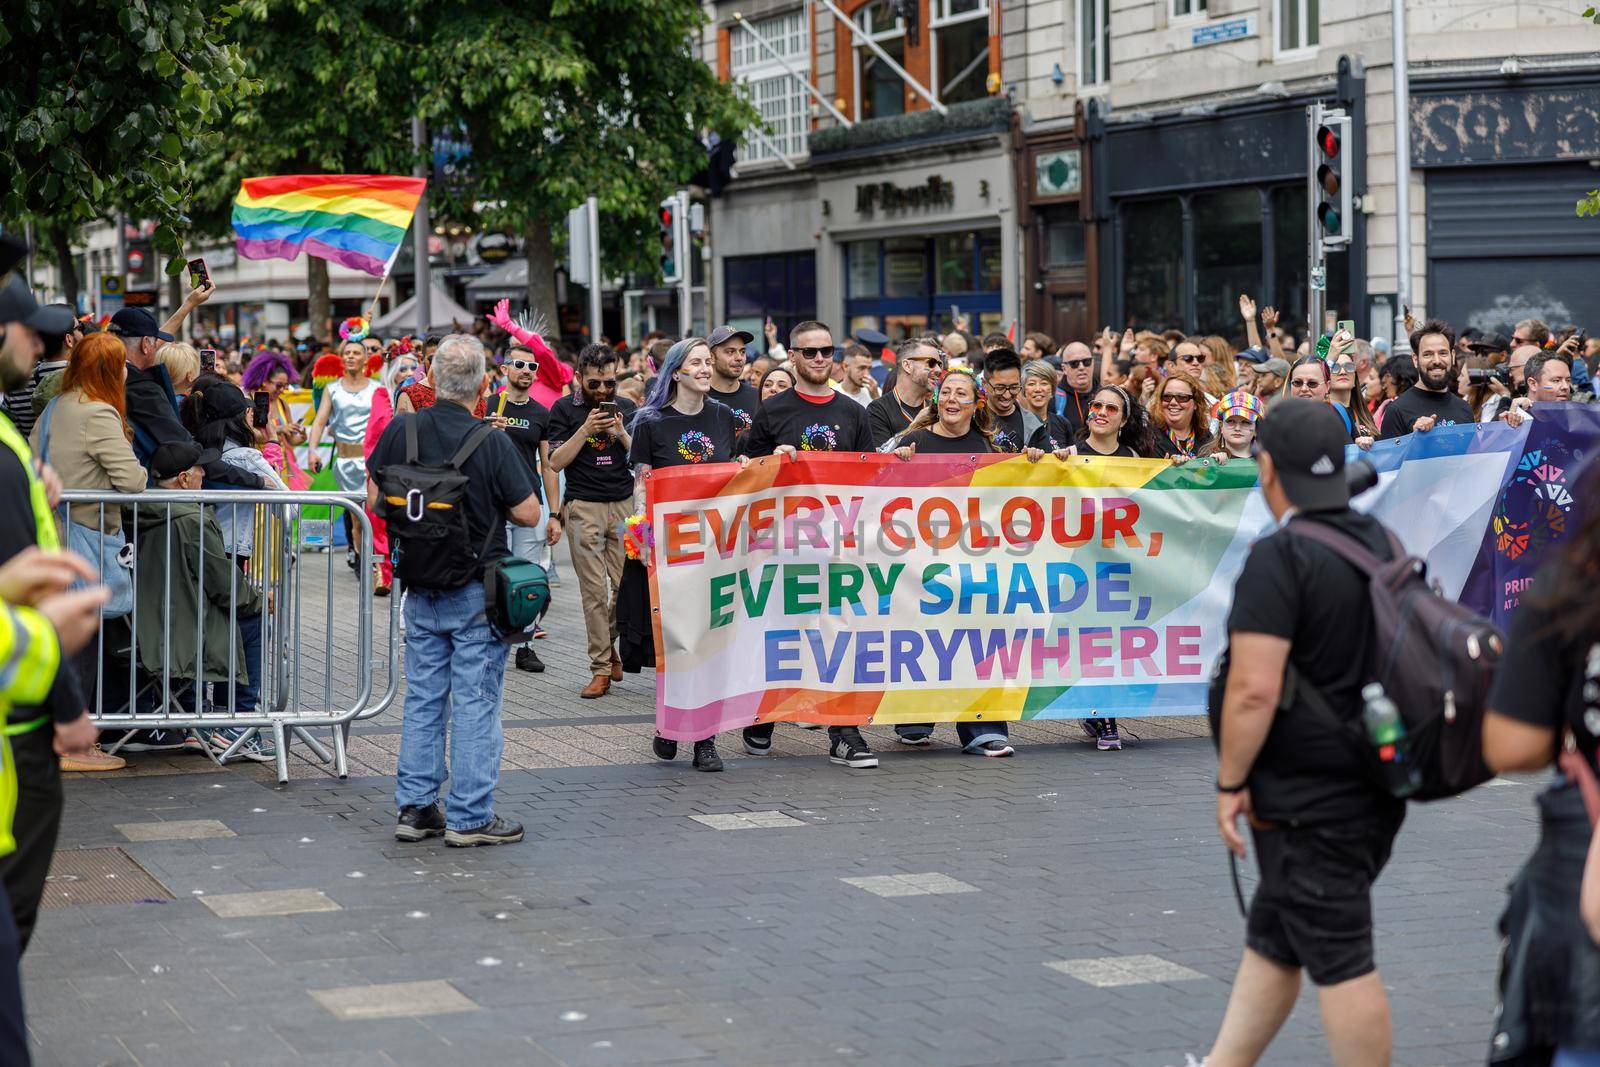 Dublin, Ireland, June 25th 2022. Ireland pride 2022 parade with people walking on one of the main city street. High quality photo